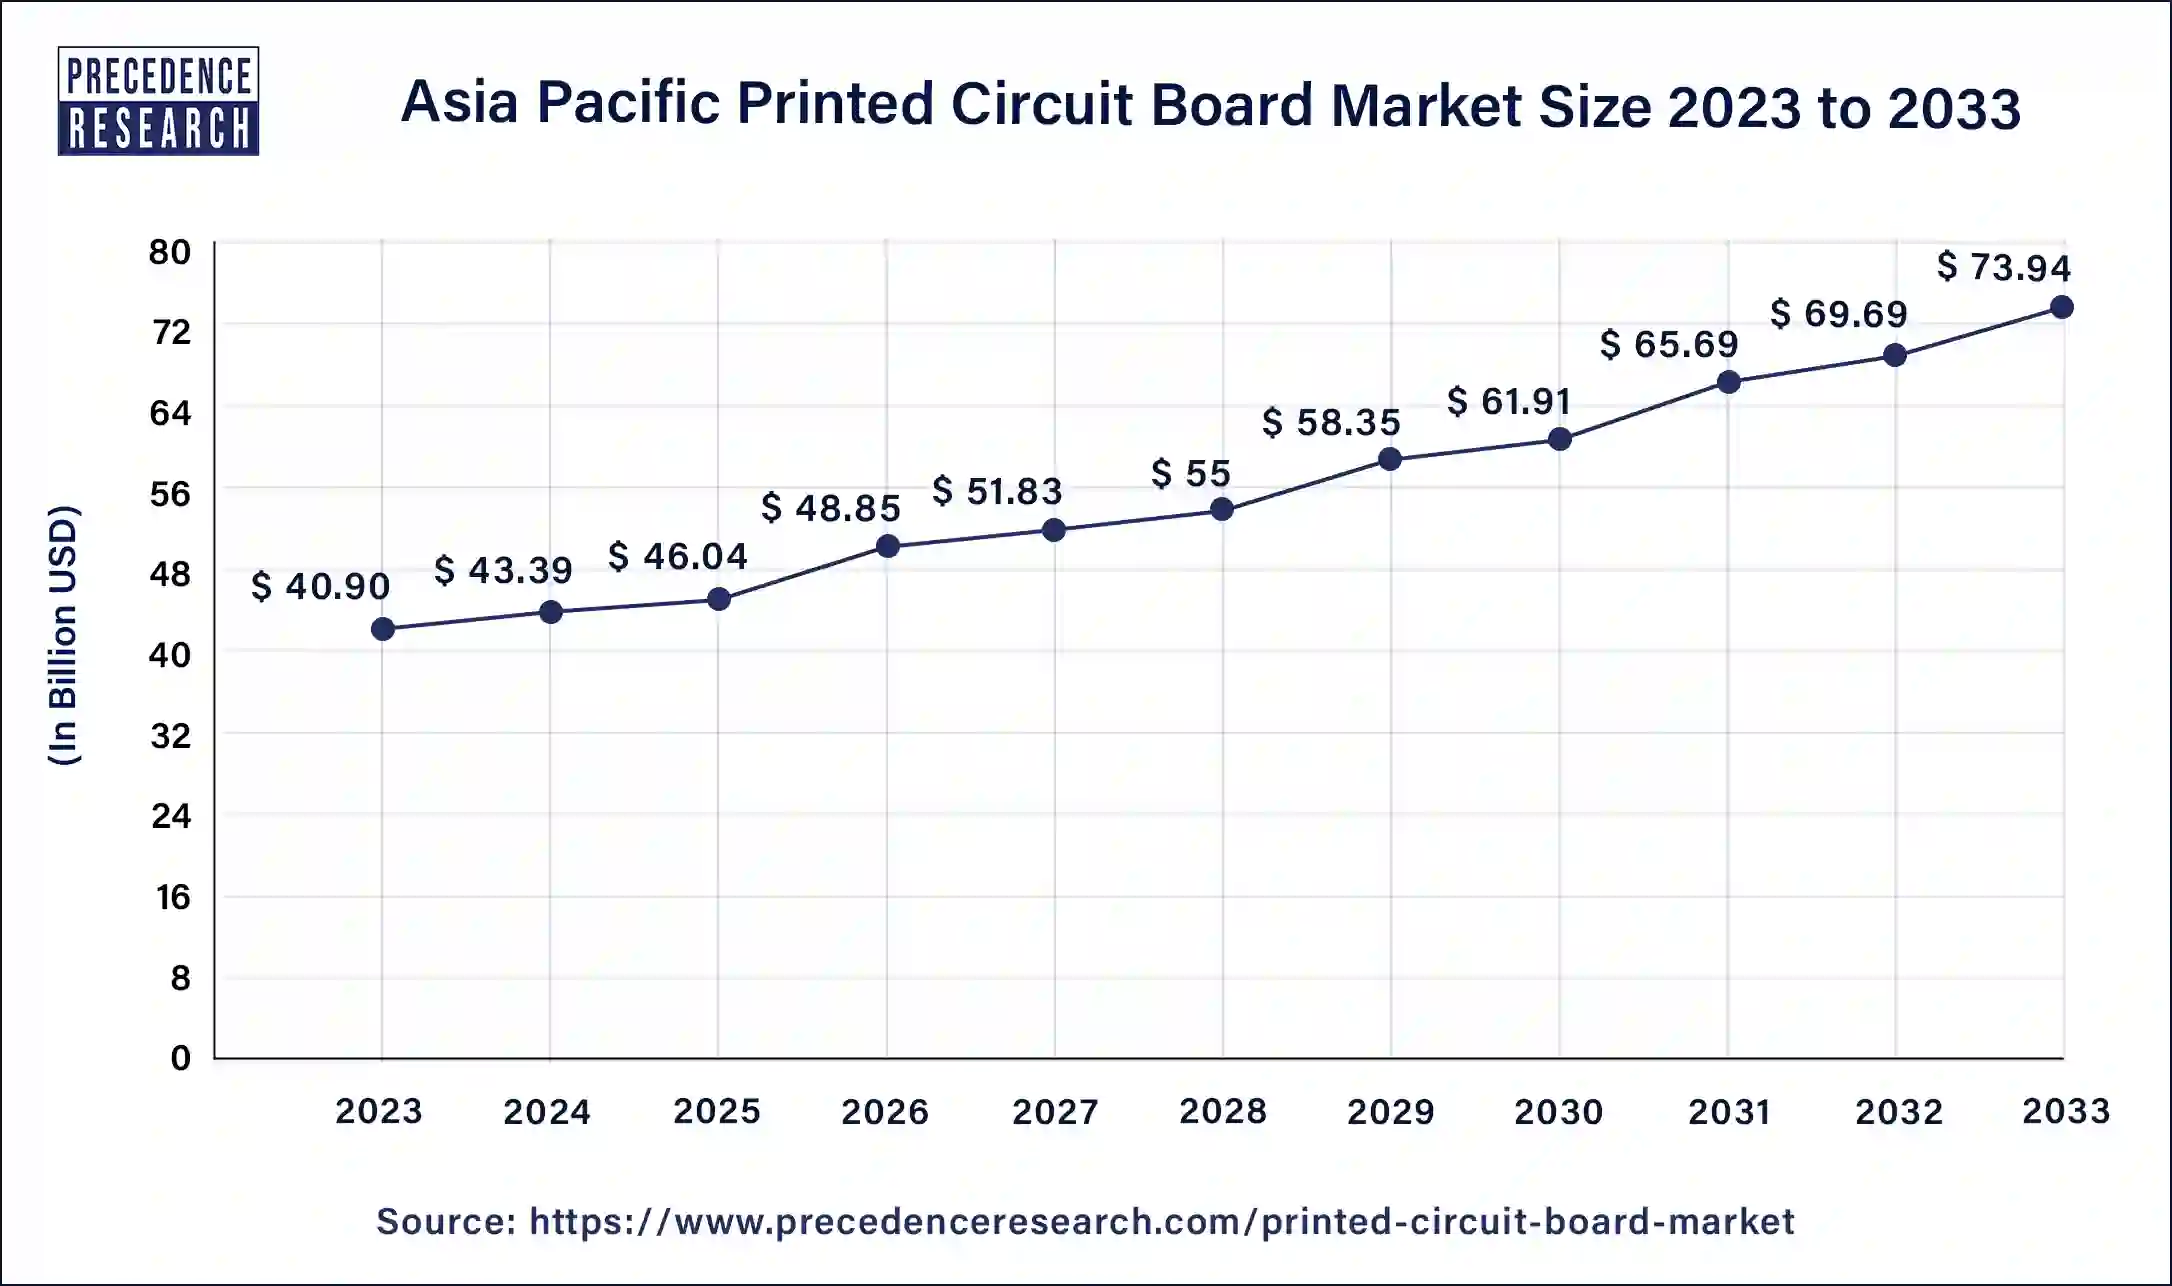 Asia Pacific Printed Circuit Board Market Size 2024 to 2033